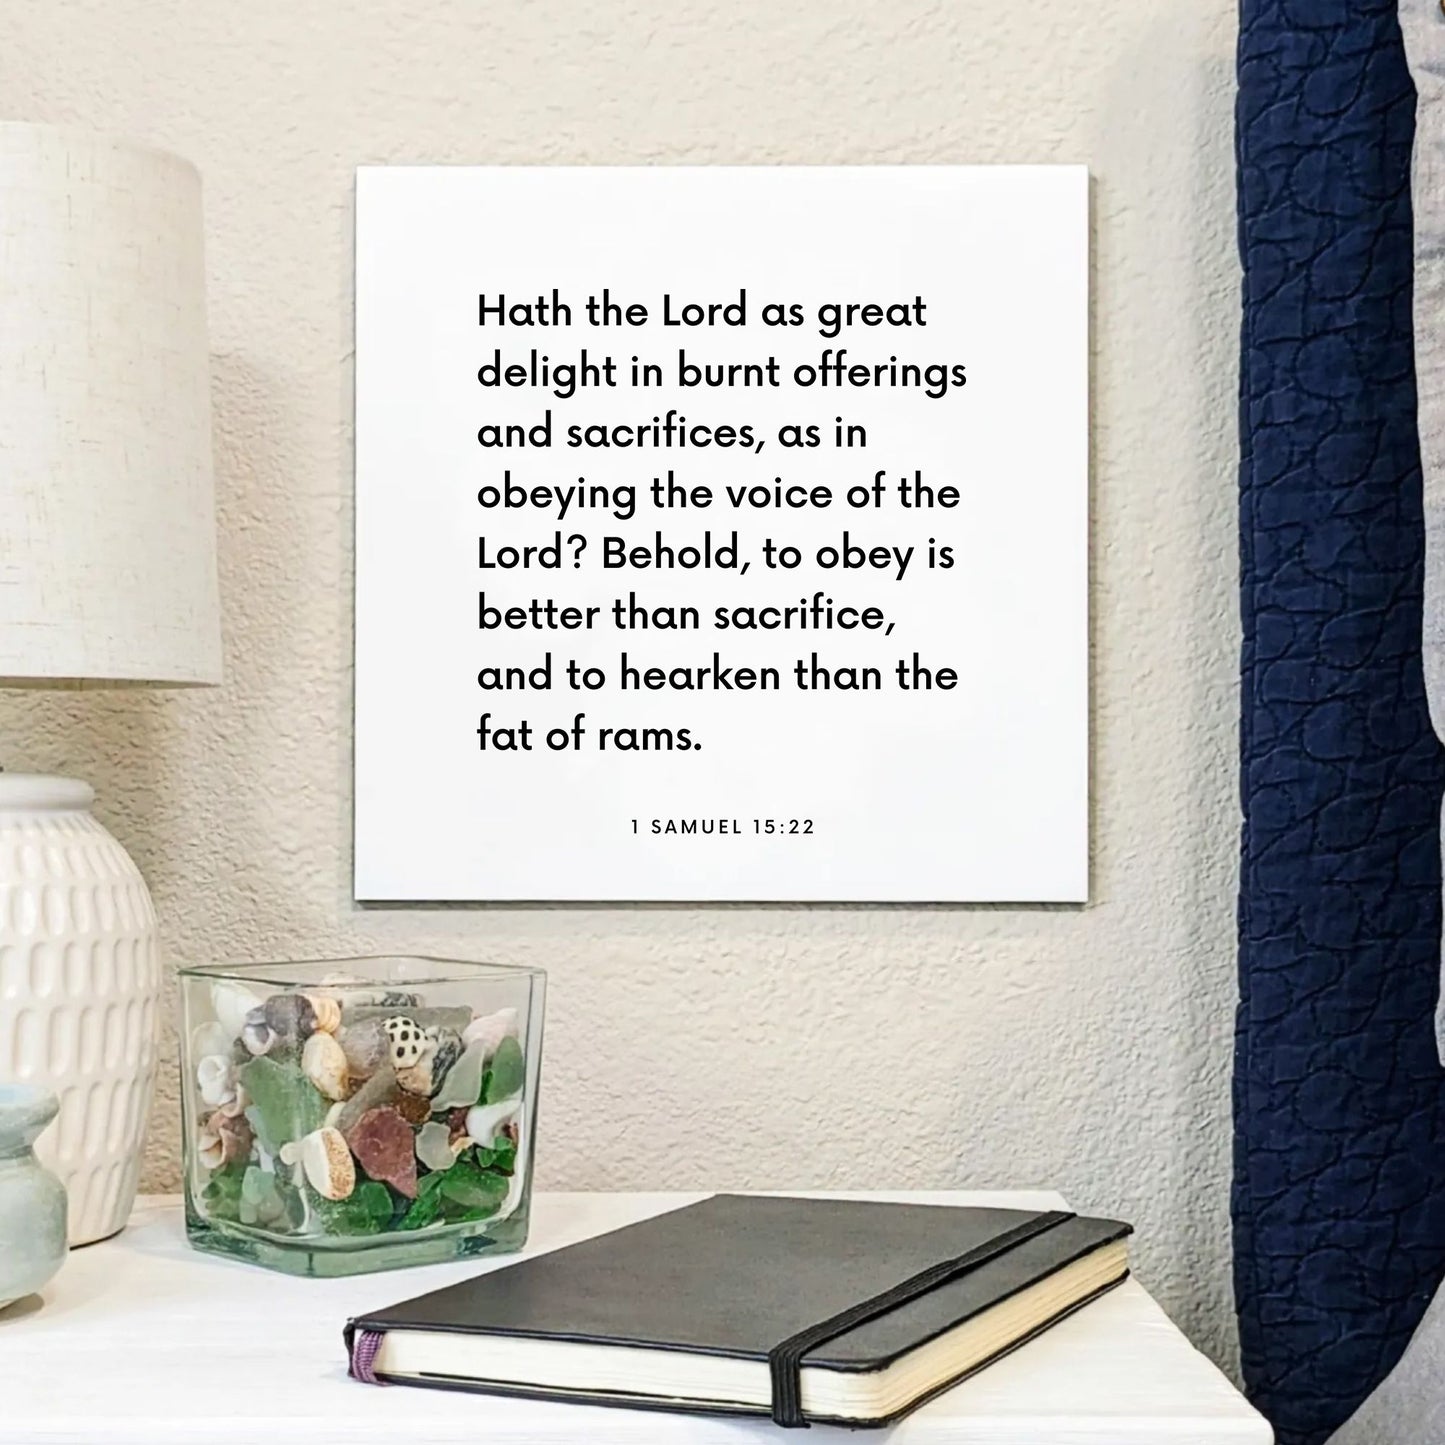 Bedside mouting of the scripture tile for 1 Samuel 15:22 - "To obey is better than sacrifice"